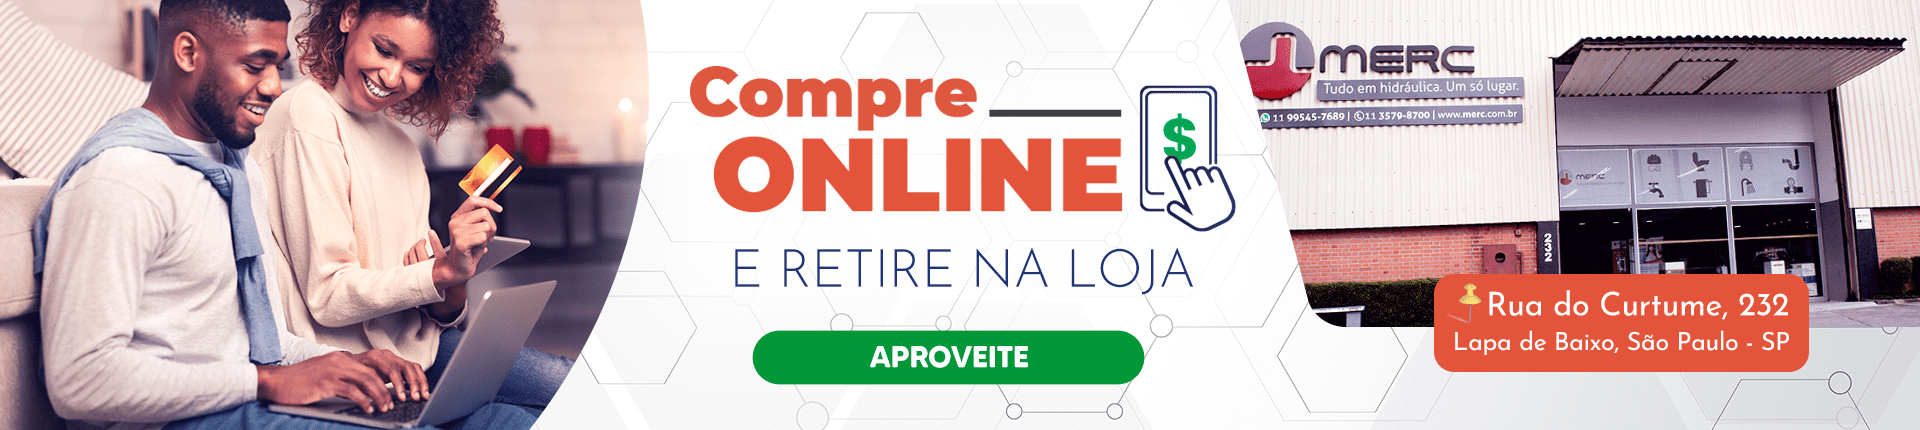 compreonline